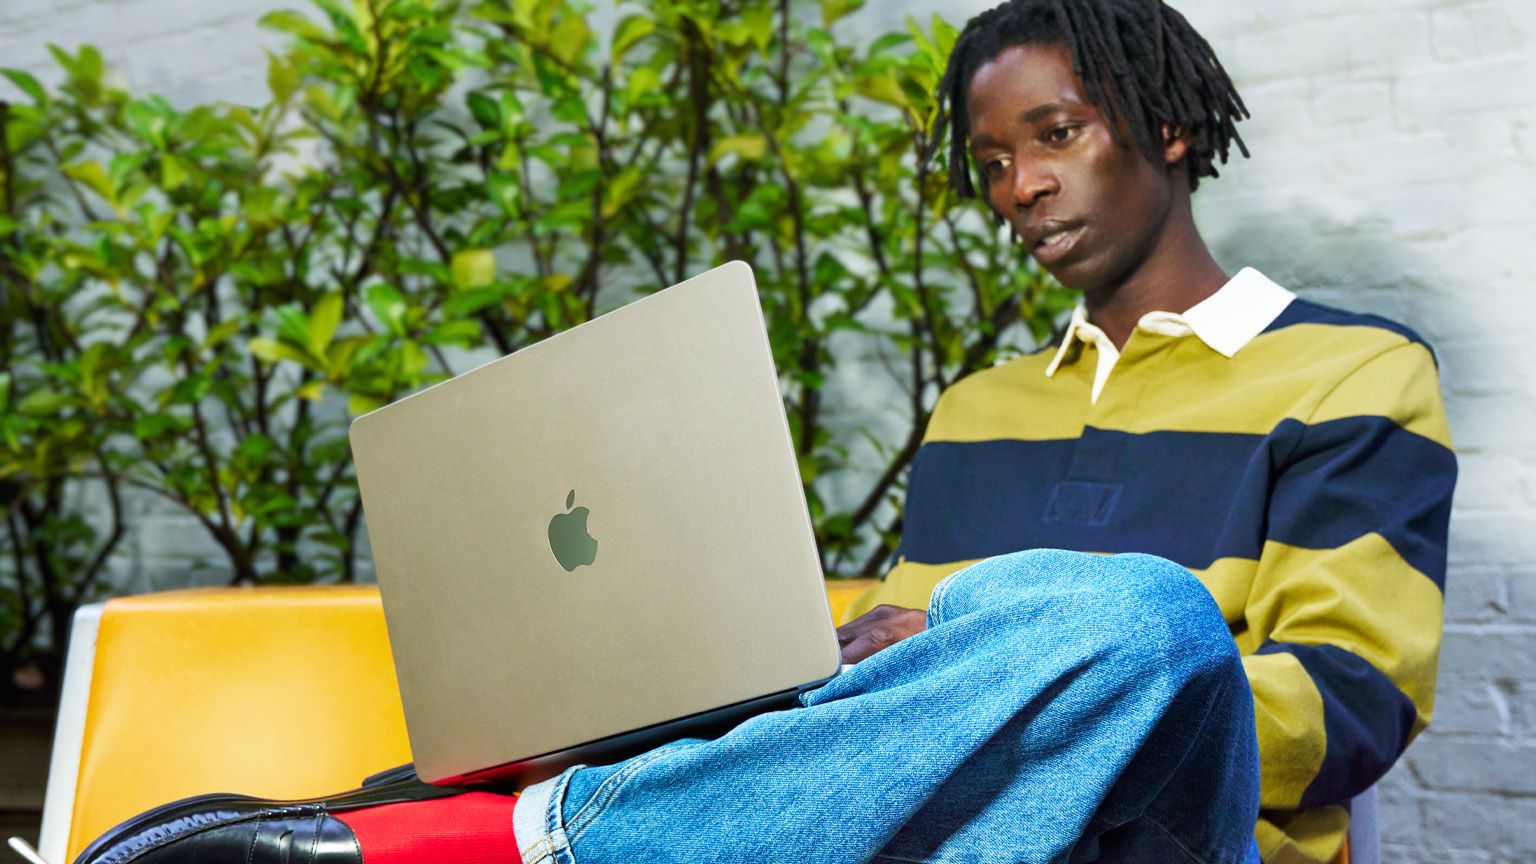 Man seated holding a MacBook Air on his lap